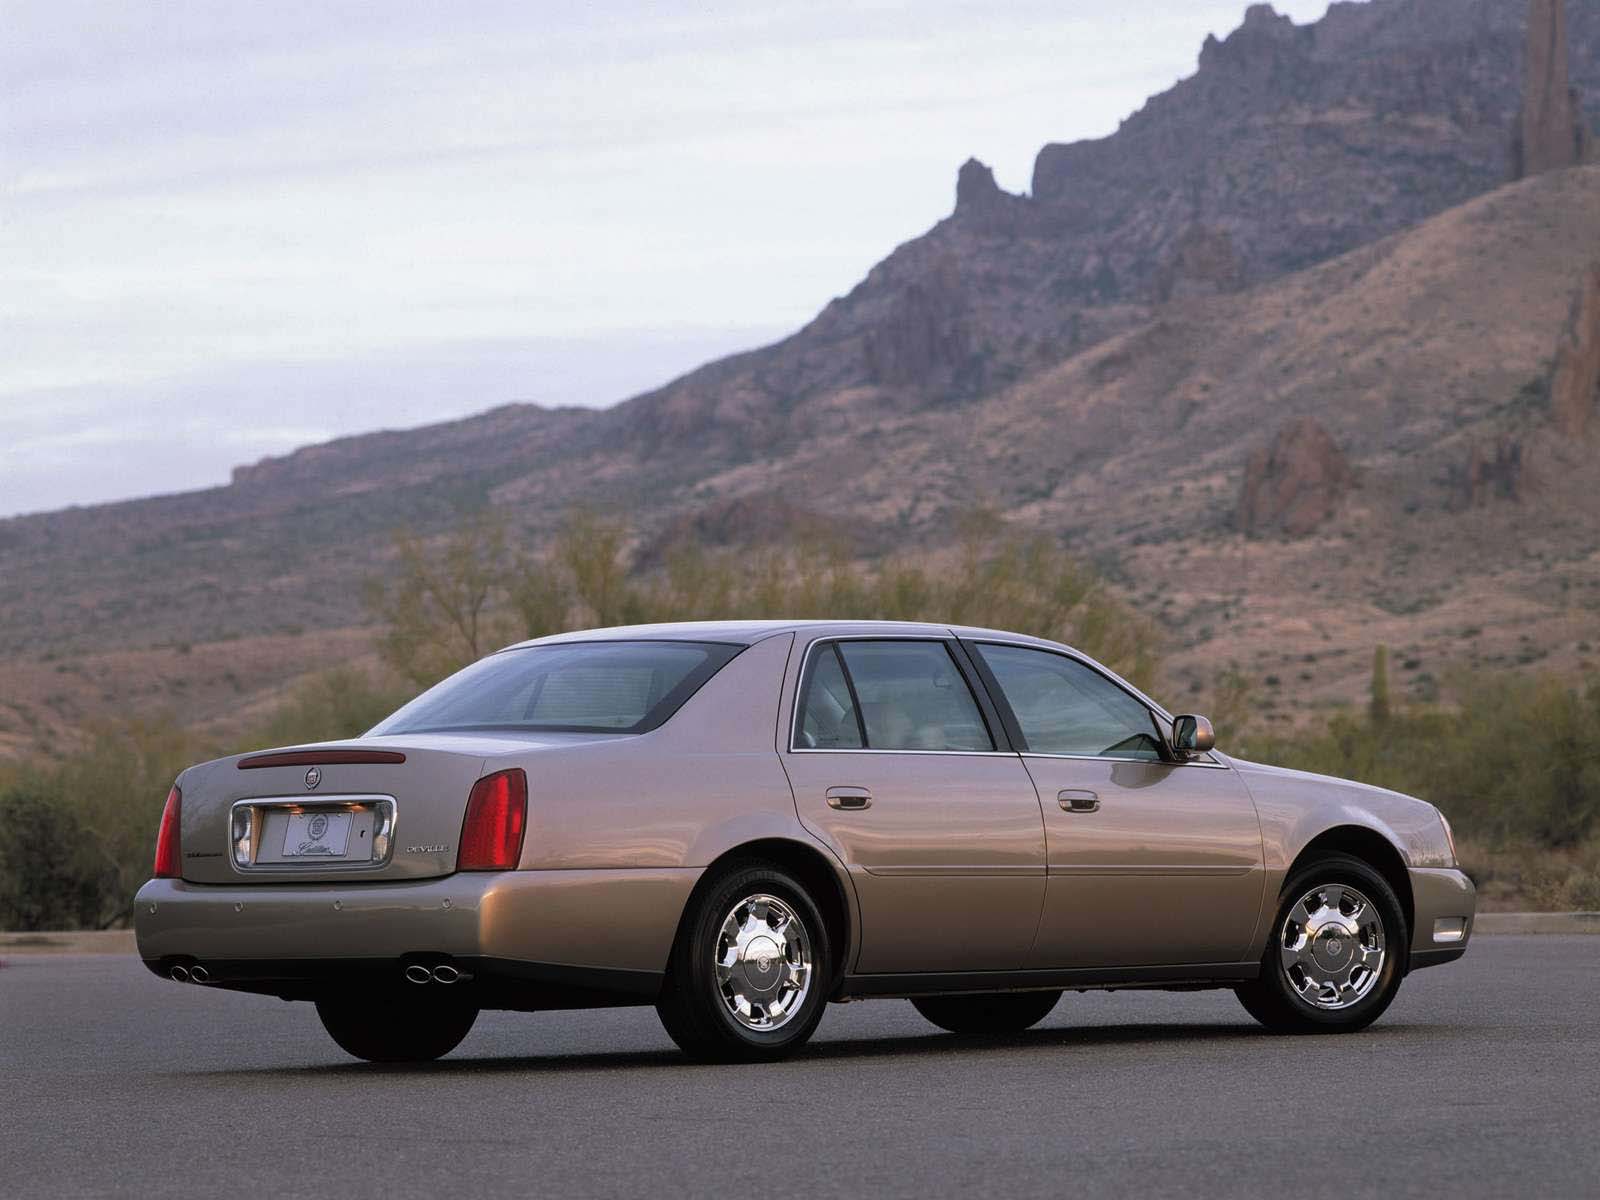 Sport Cars: Cadillac Deville DTS 2001